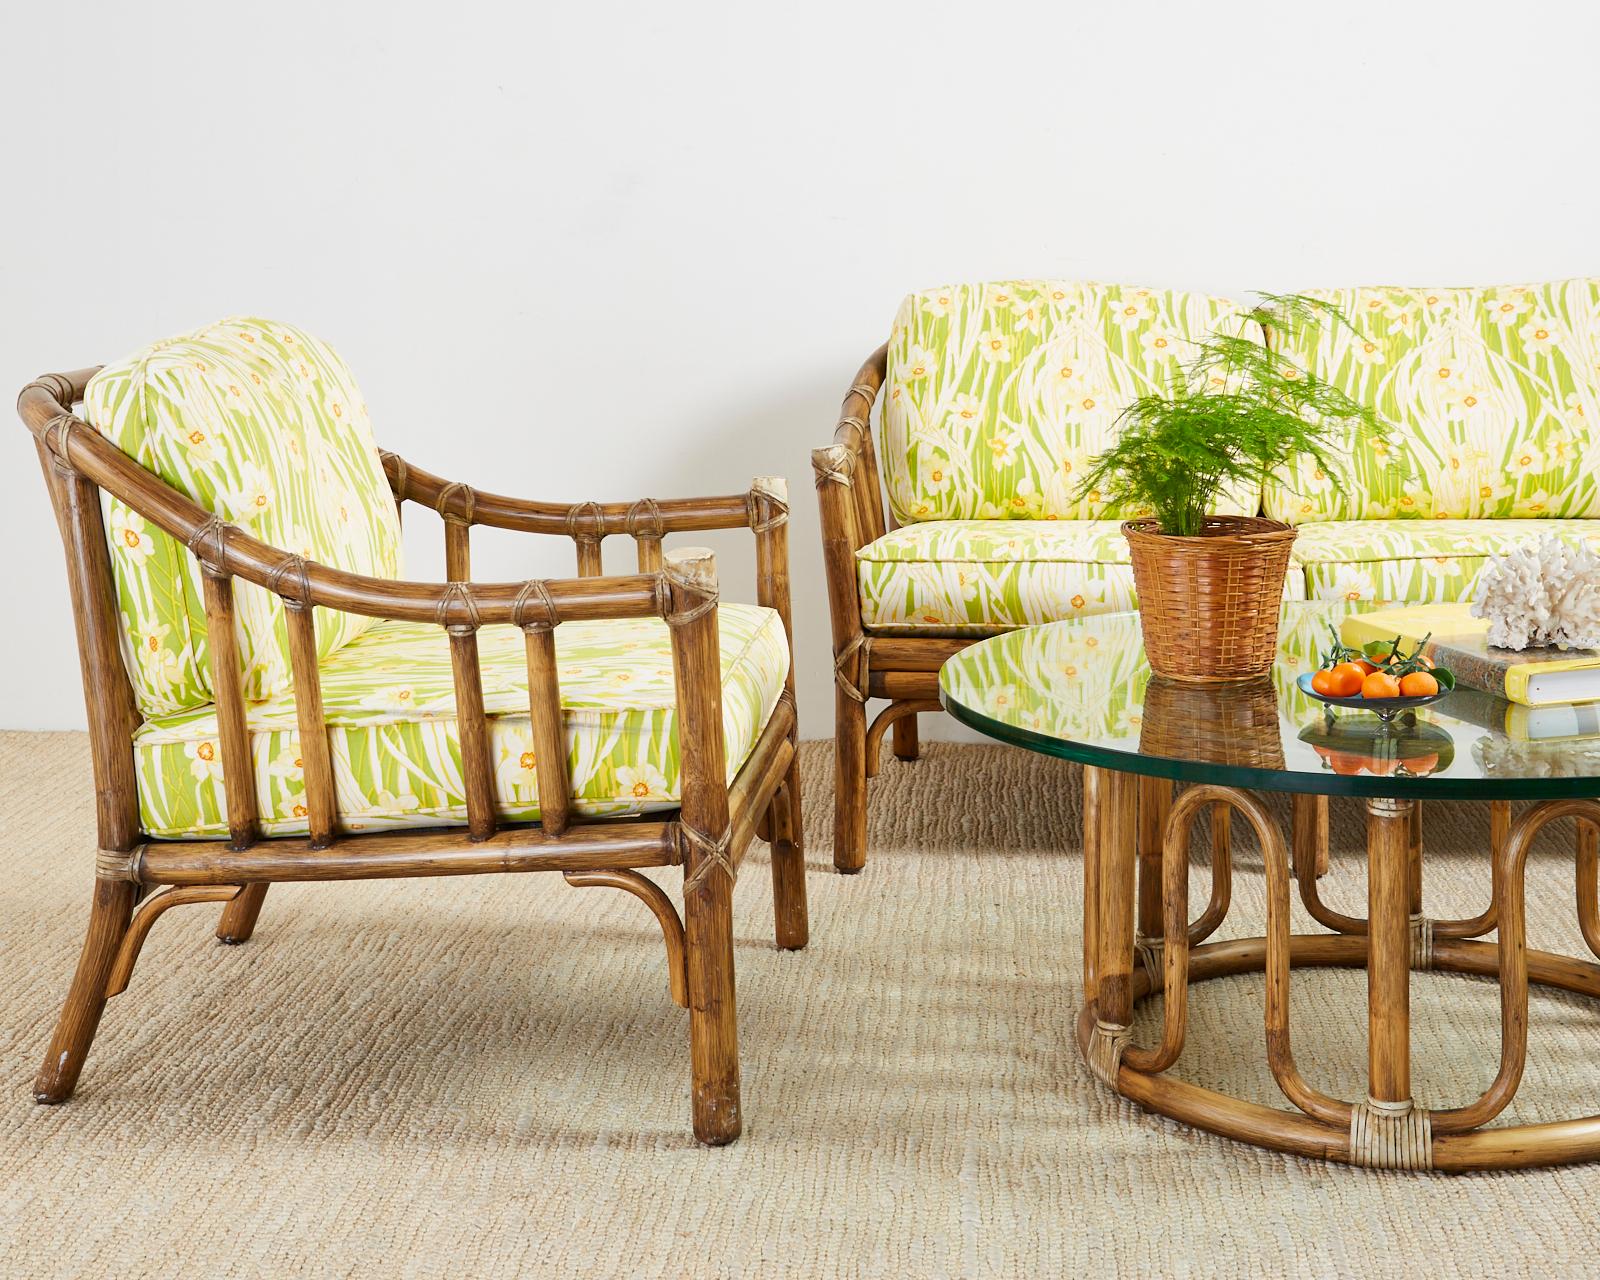 Genuine McGuire pair of bamboo rattan lounge or club chairs made in the California organic modern style. The chairs feature thick rattan bent pole frames lashed together with leather rawhide laces. Topped with bright floral motif upholstered